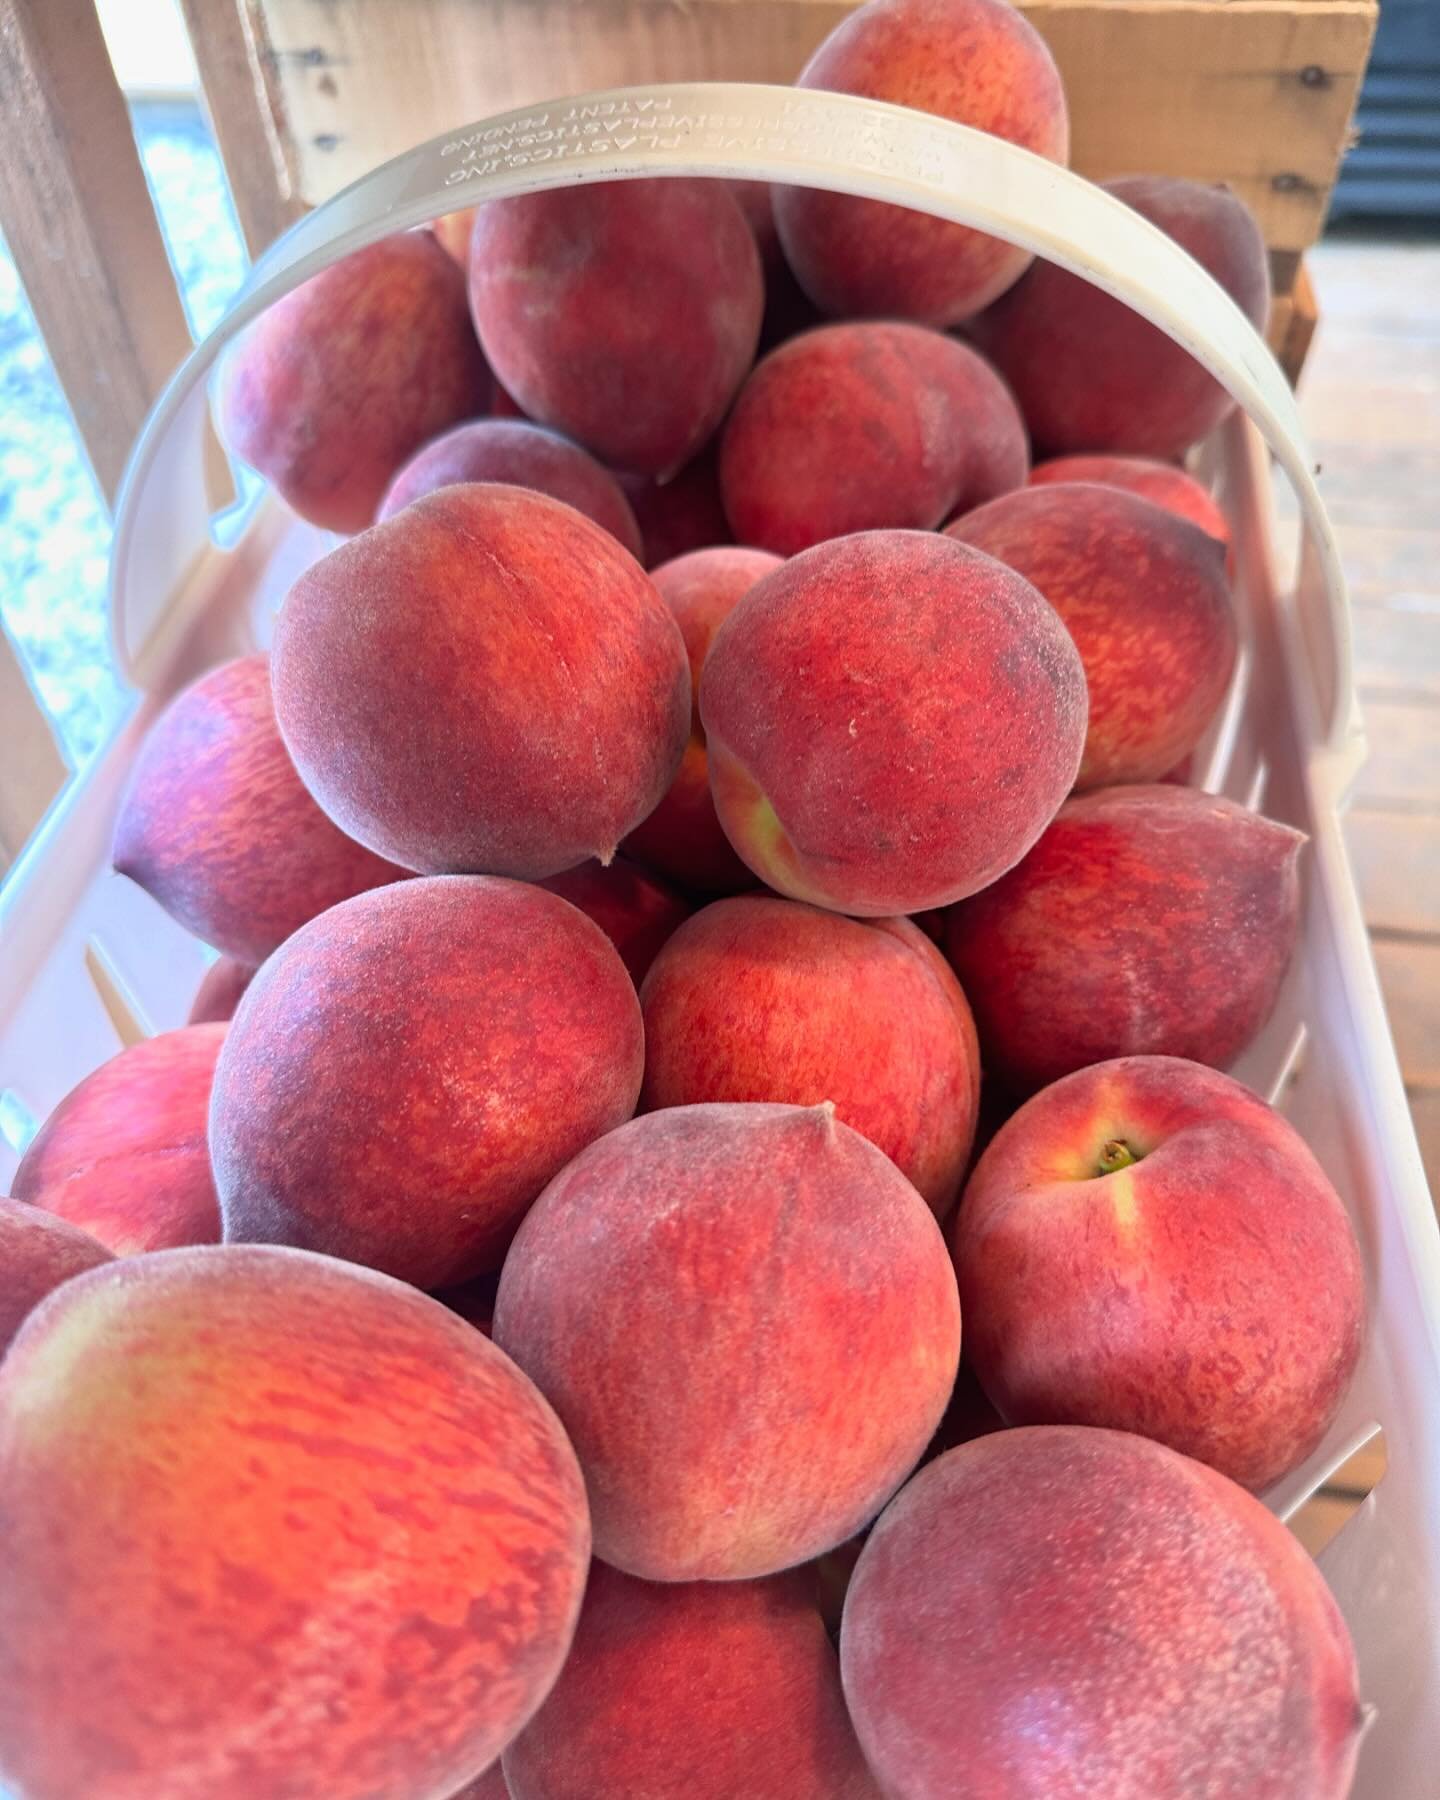 South Carolina Peach Season has begun! Donovan just picked up &amp; unloaded more Watermelons, Tomatoes, Strawberries, &amp; local Honey as well! Come on by and see us, We will take good care of you.